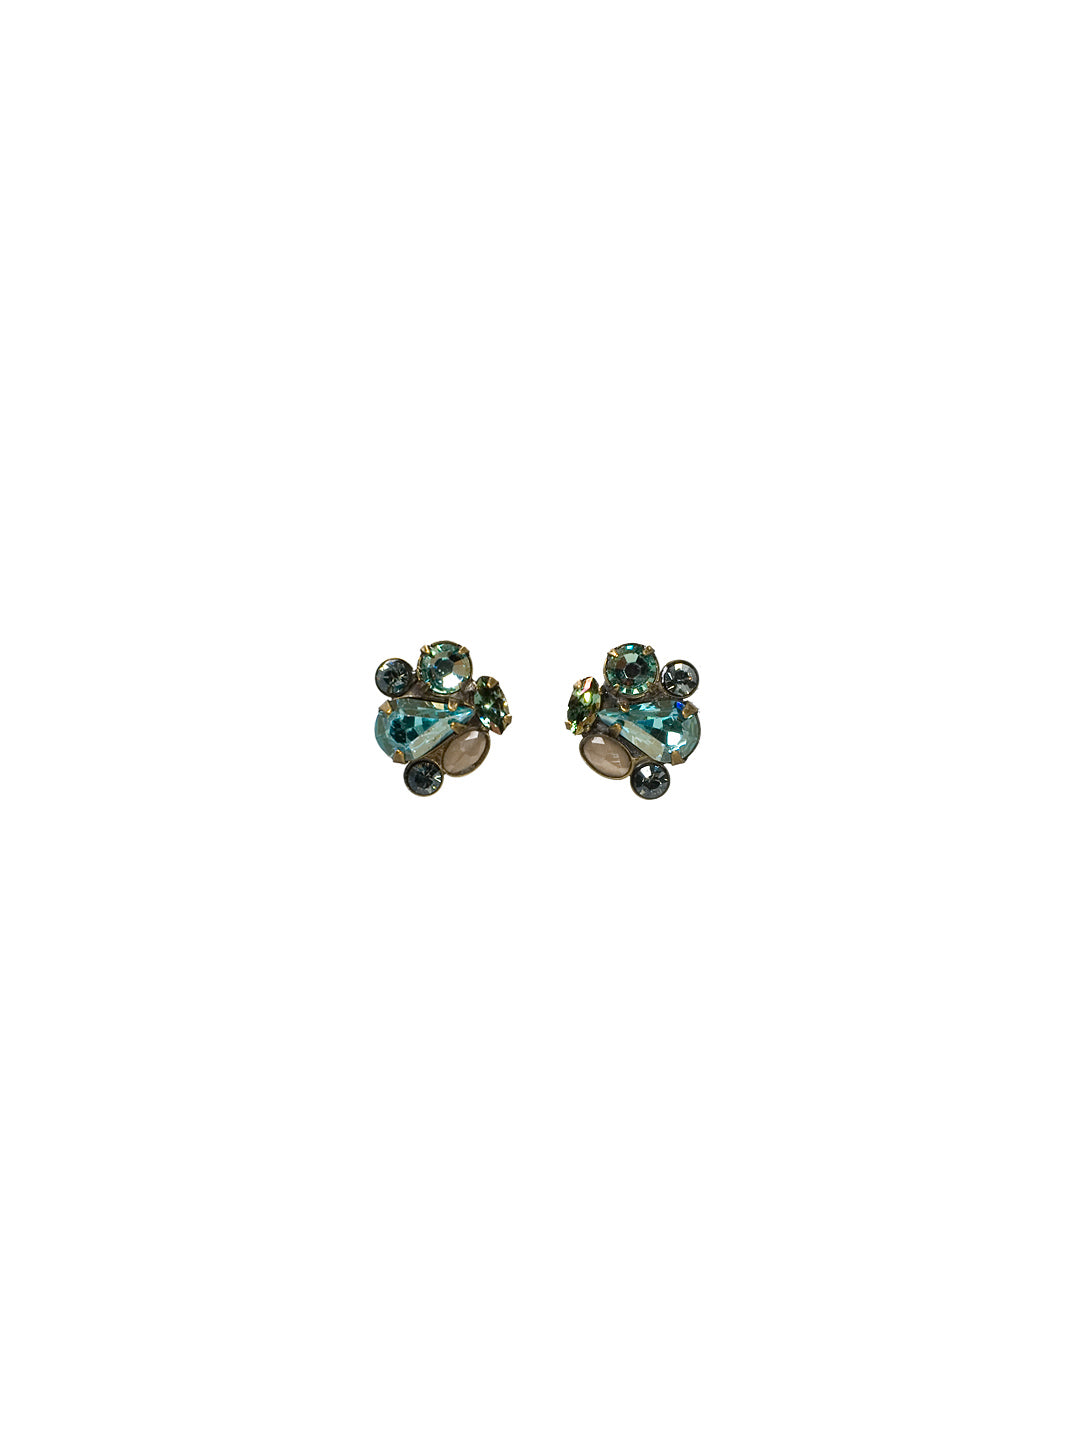 Abstract Cluster Earring - EBS18AGAQB - This multi stone cluster earring features a small statement of dimension. From Sorrelli's Aqua Bubbles collection in our Antique Gold-tone finish.